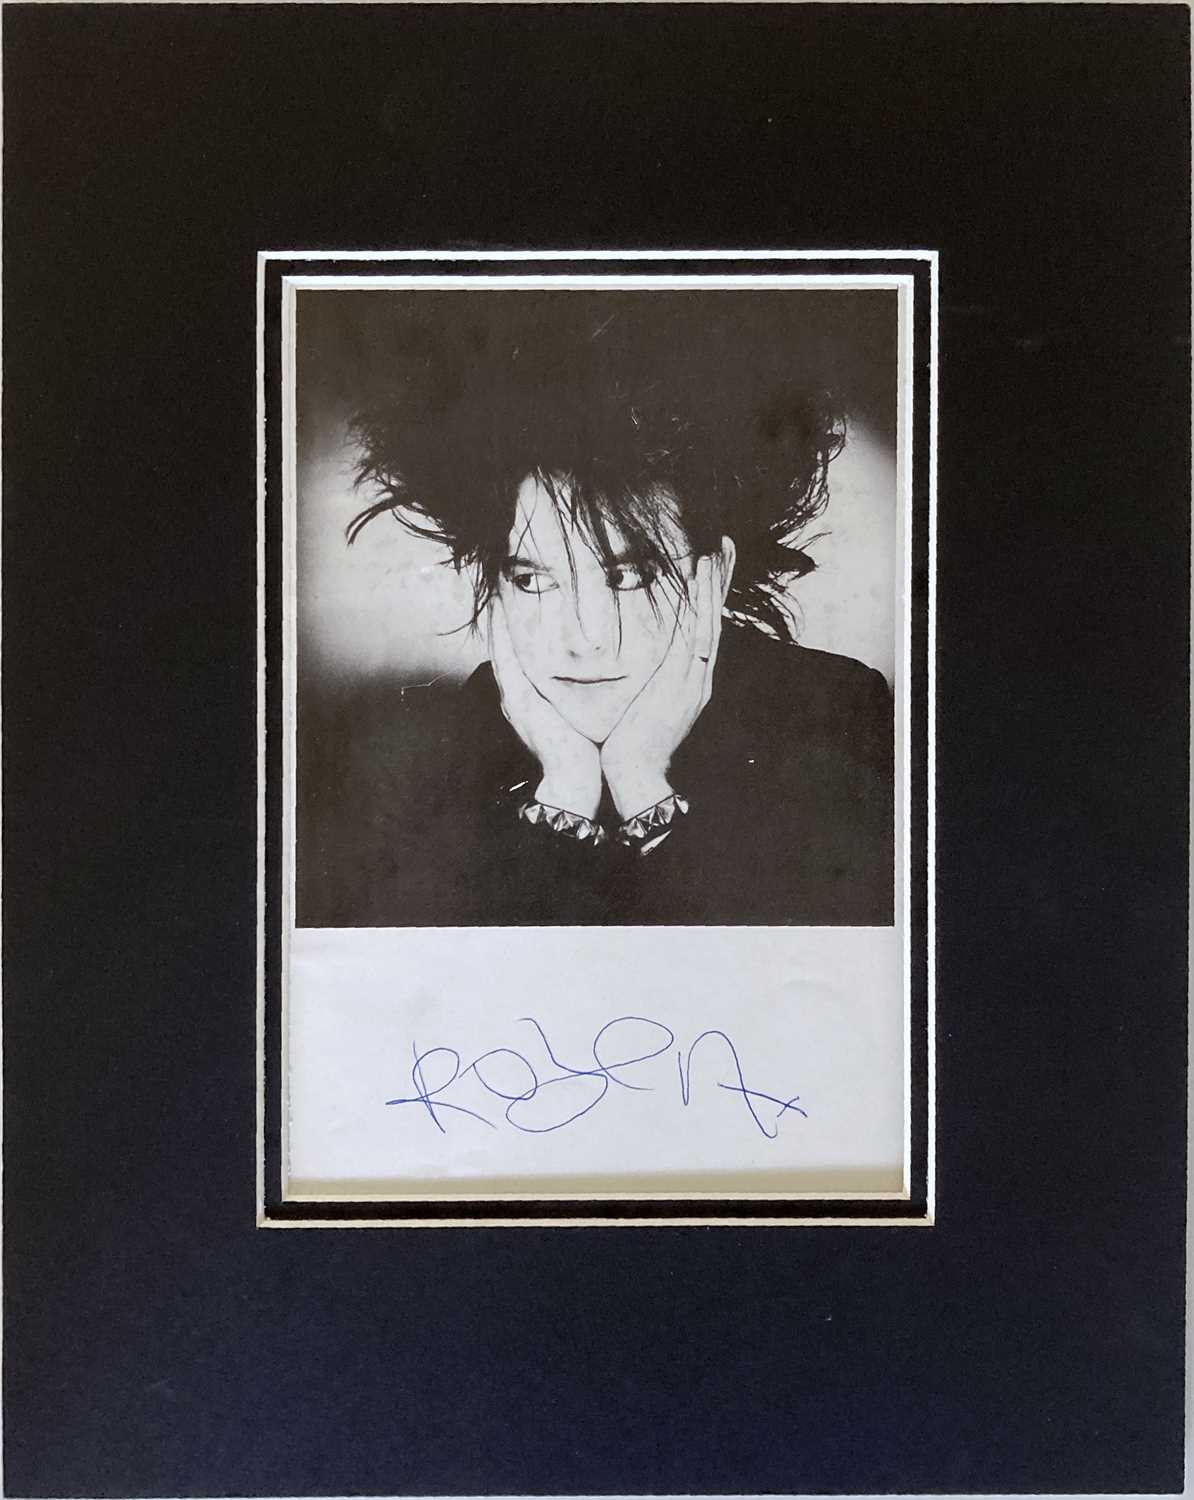 THE CURE - ROBERT SMITH SIGNED PROMOTIONAL PHOTOGRAPH.